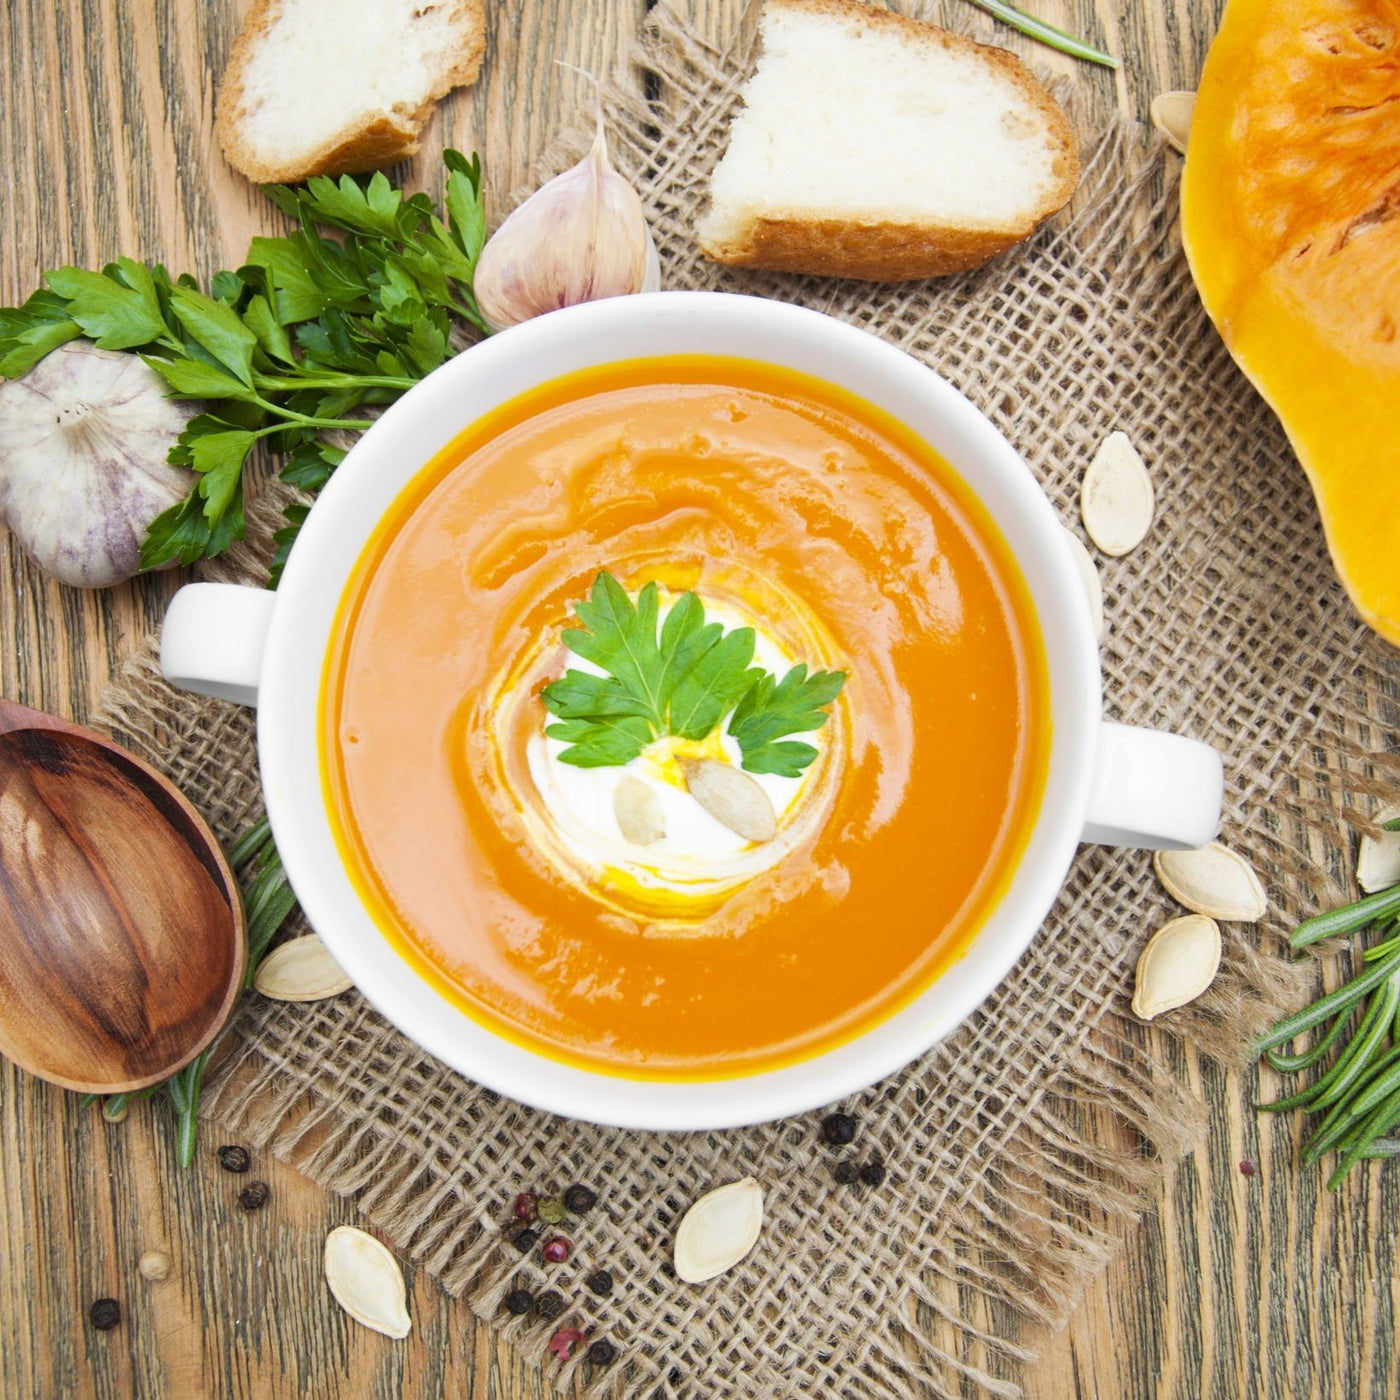 Carrot and Butternut Squash Soup (approx. 450ml)